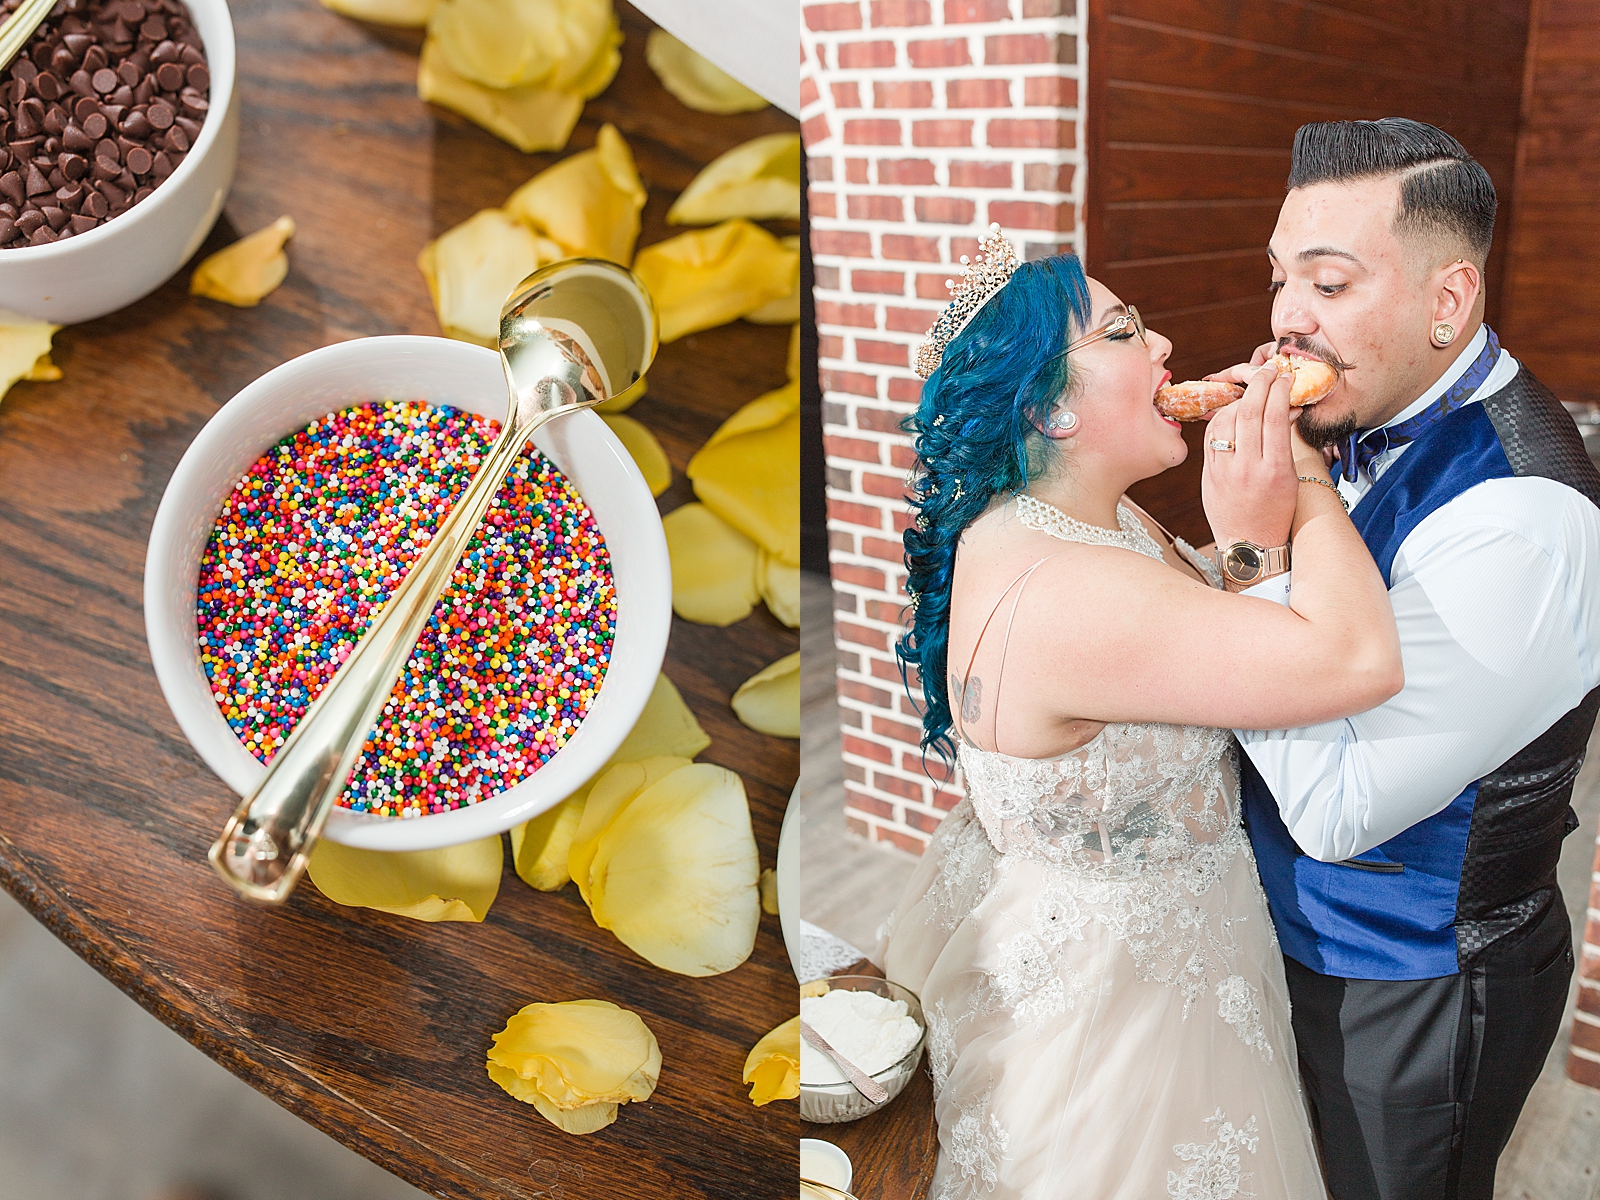 Mooresville Wedding Reception detail of bowl of Sprinkles and Bride and Groom sharing donuts Photos